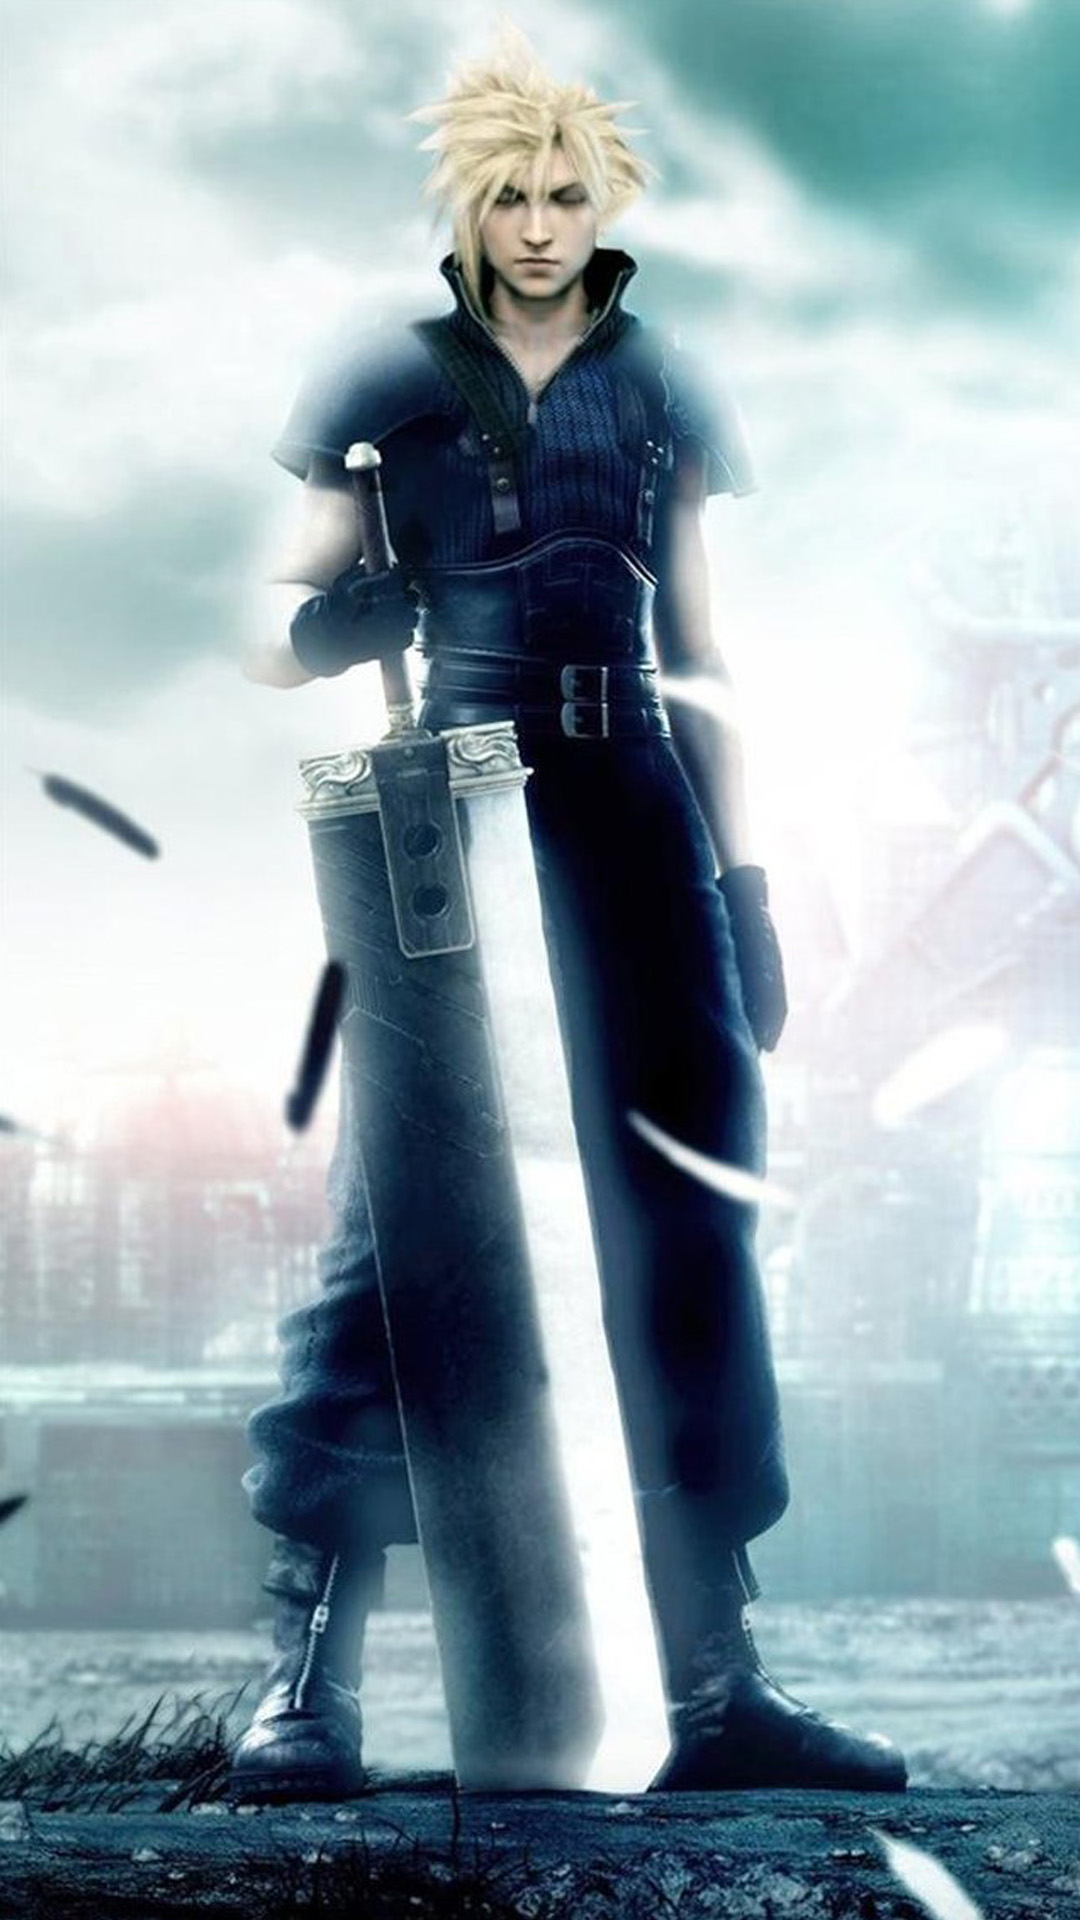  Final  Fantasy  7 Cloud Strife Android  wallpaper  Android  